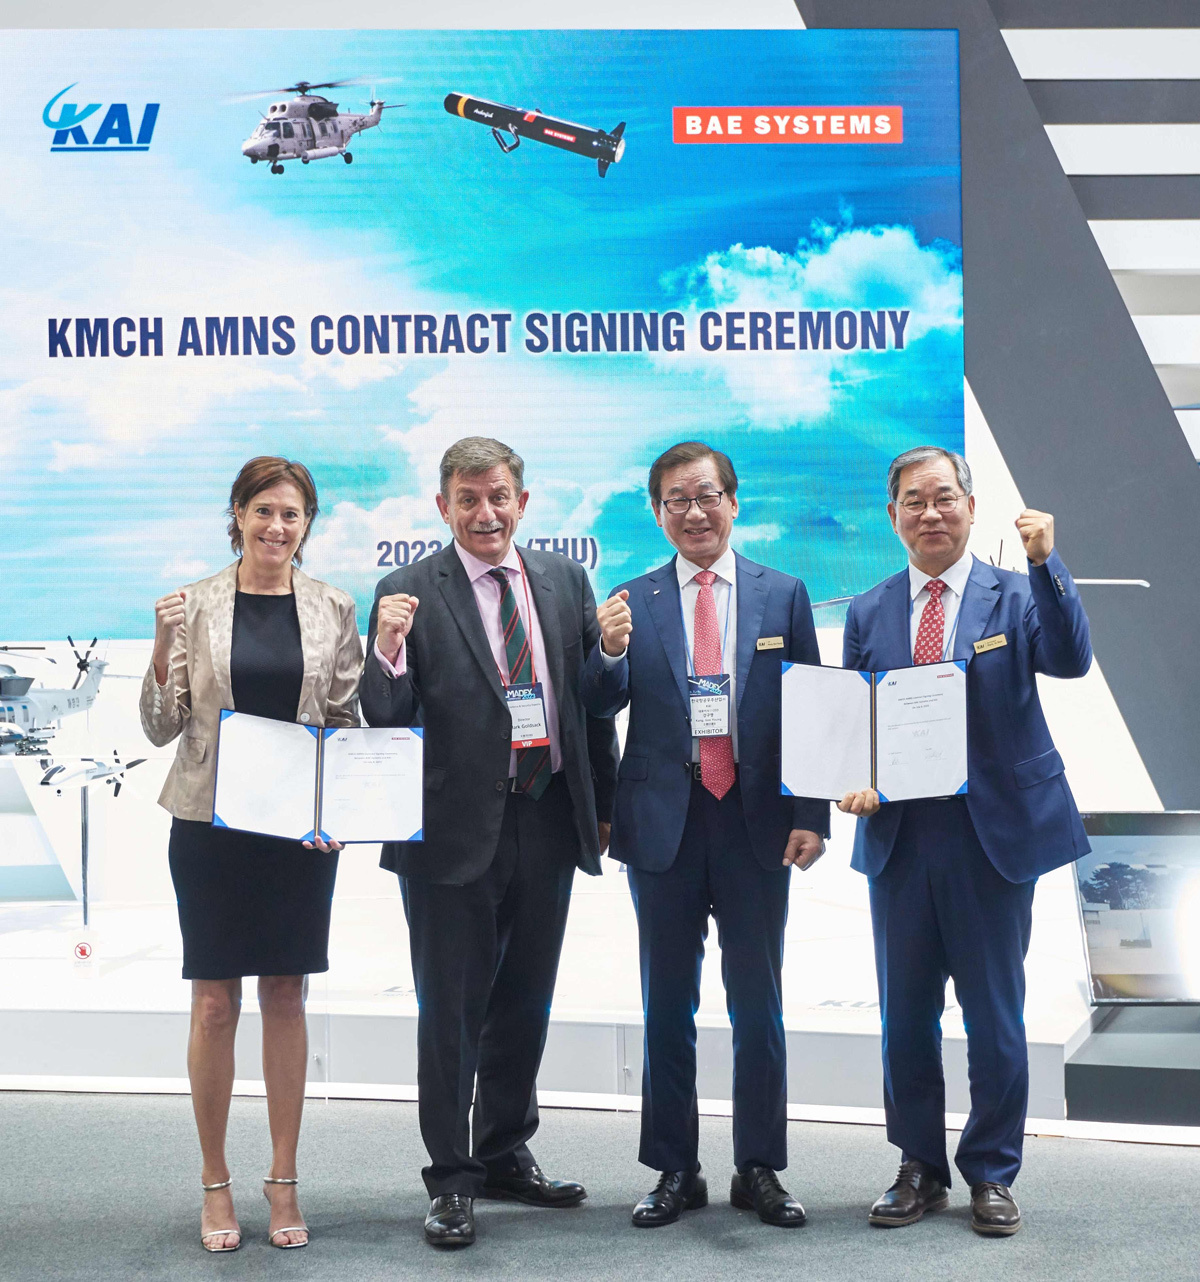 KMCH AMNS Contract signing ceremony